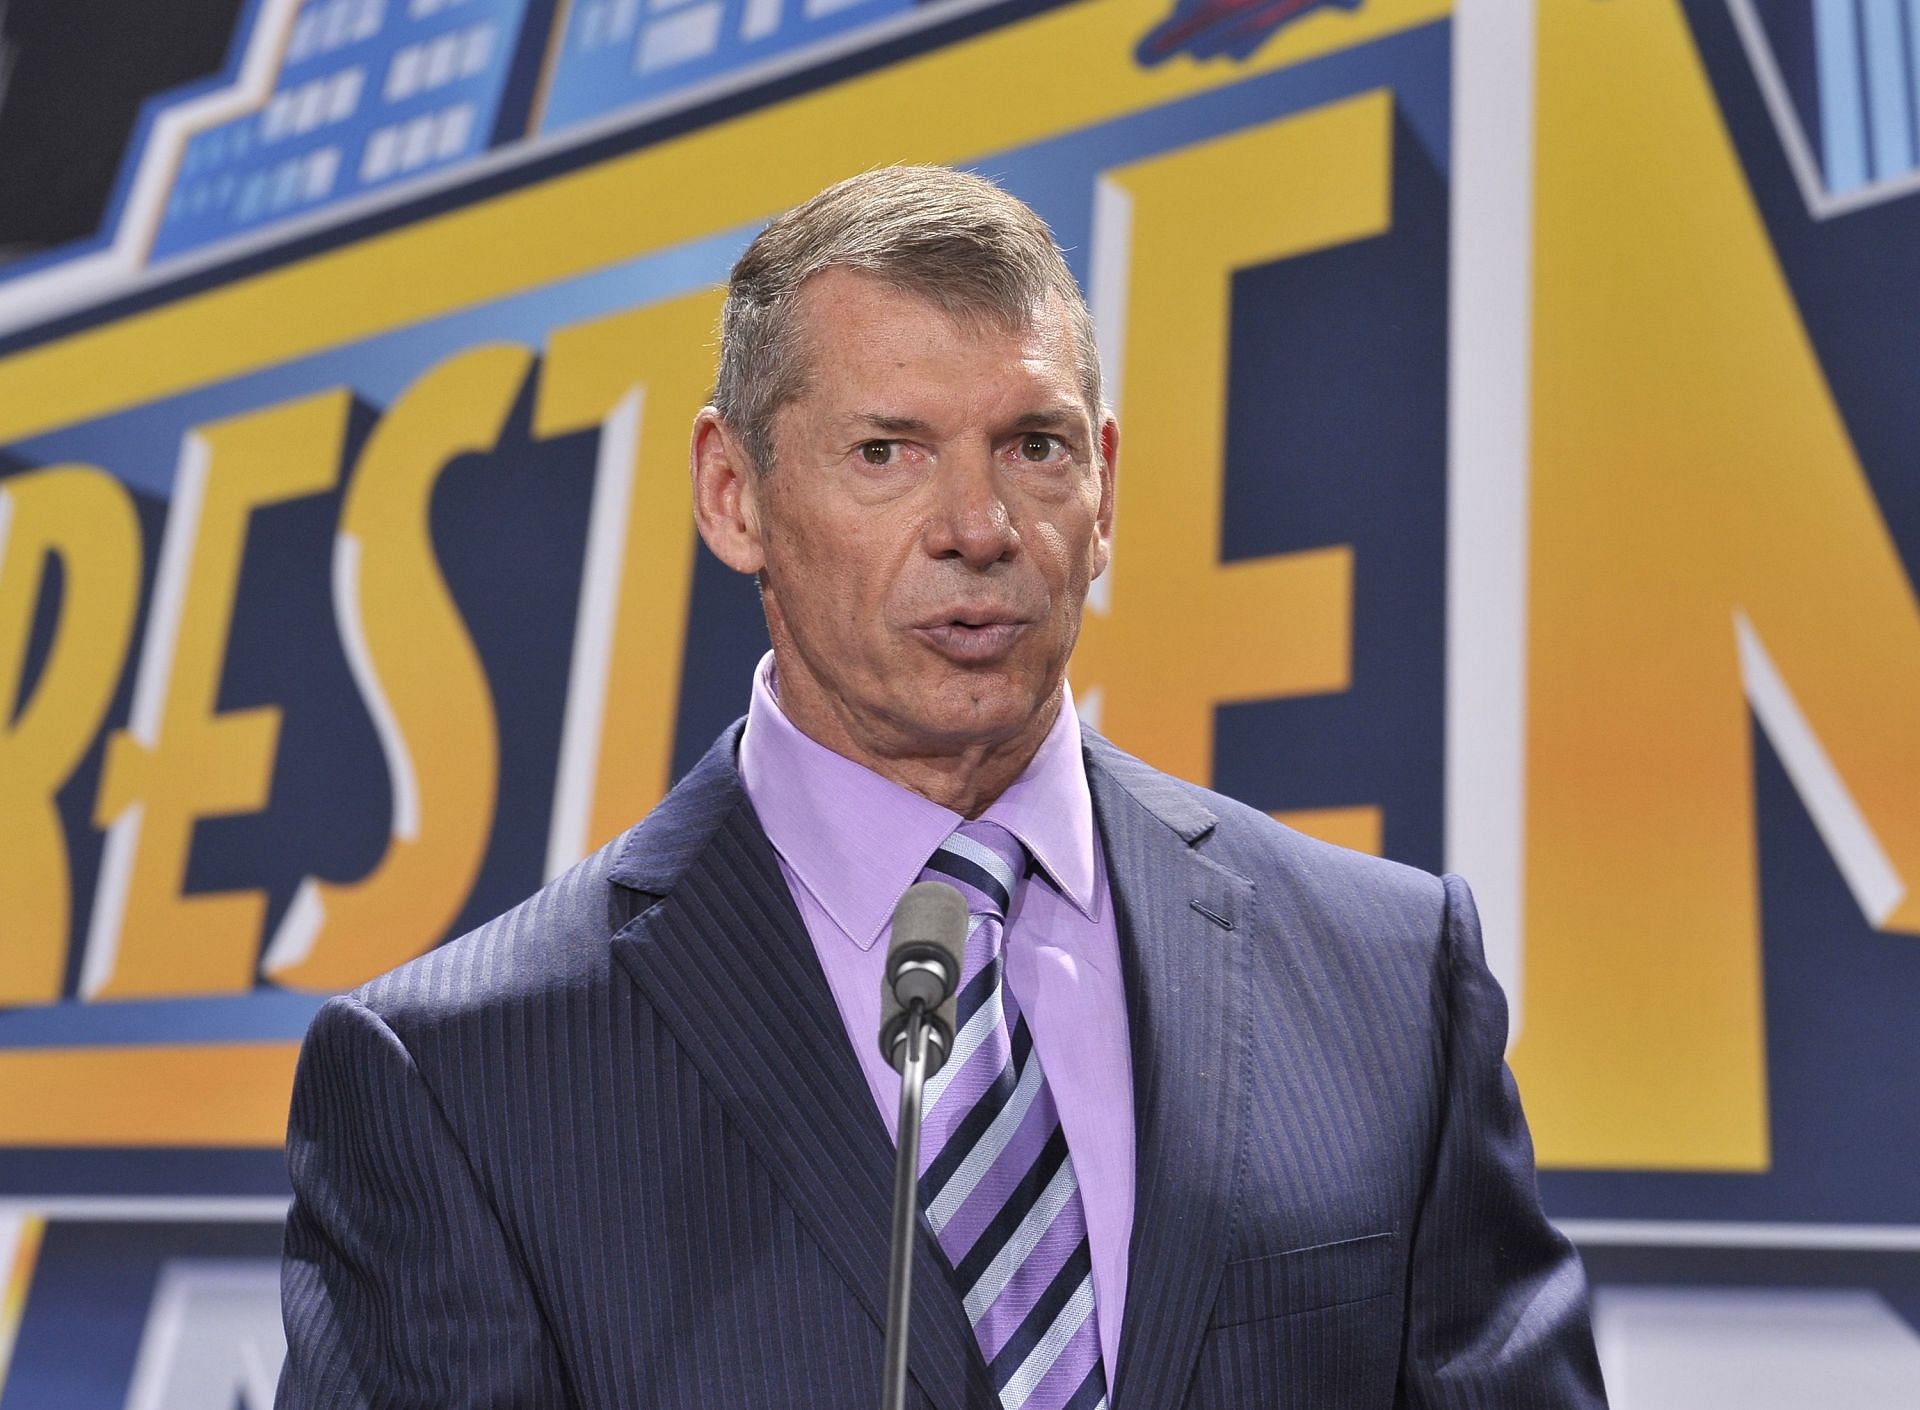 Vince McMahon is a chairman and CEO of WWE.